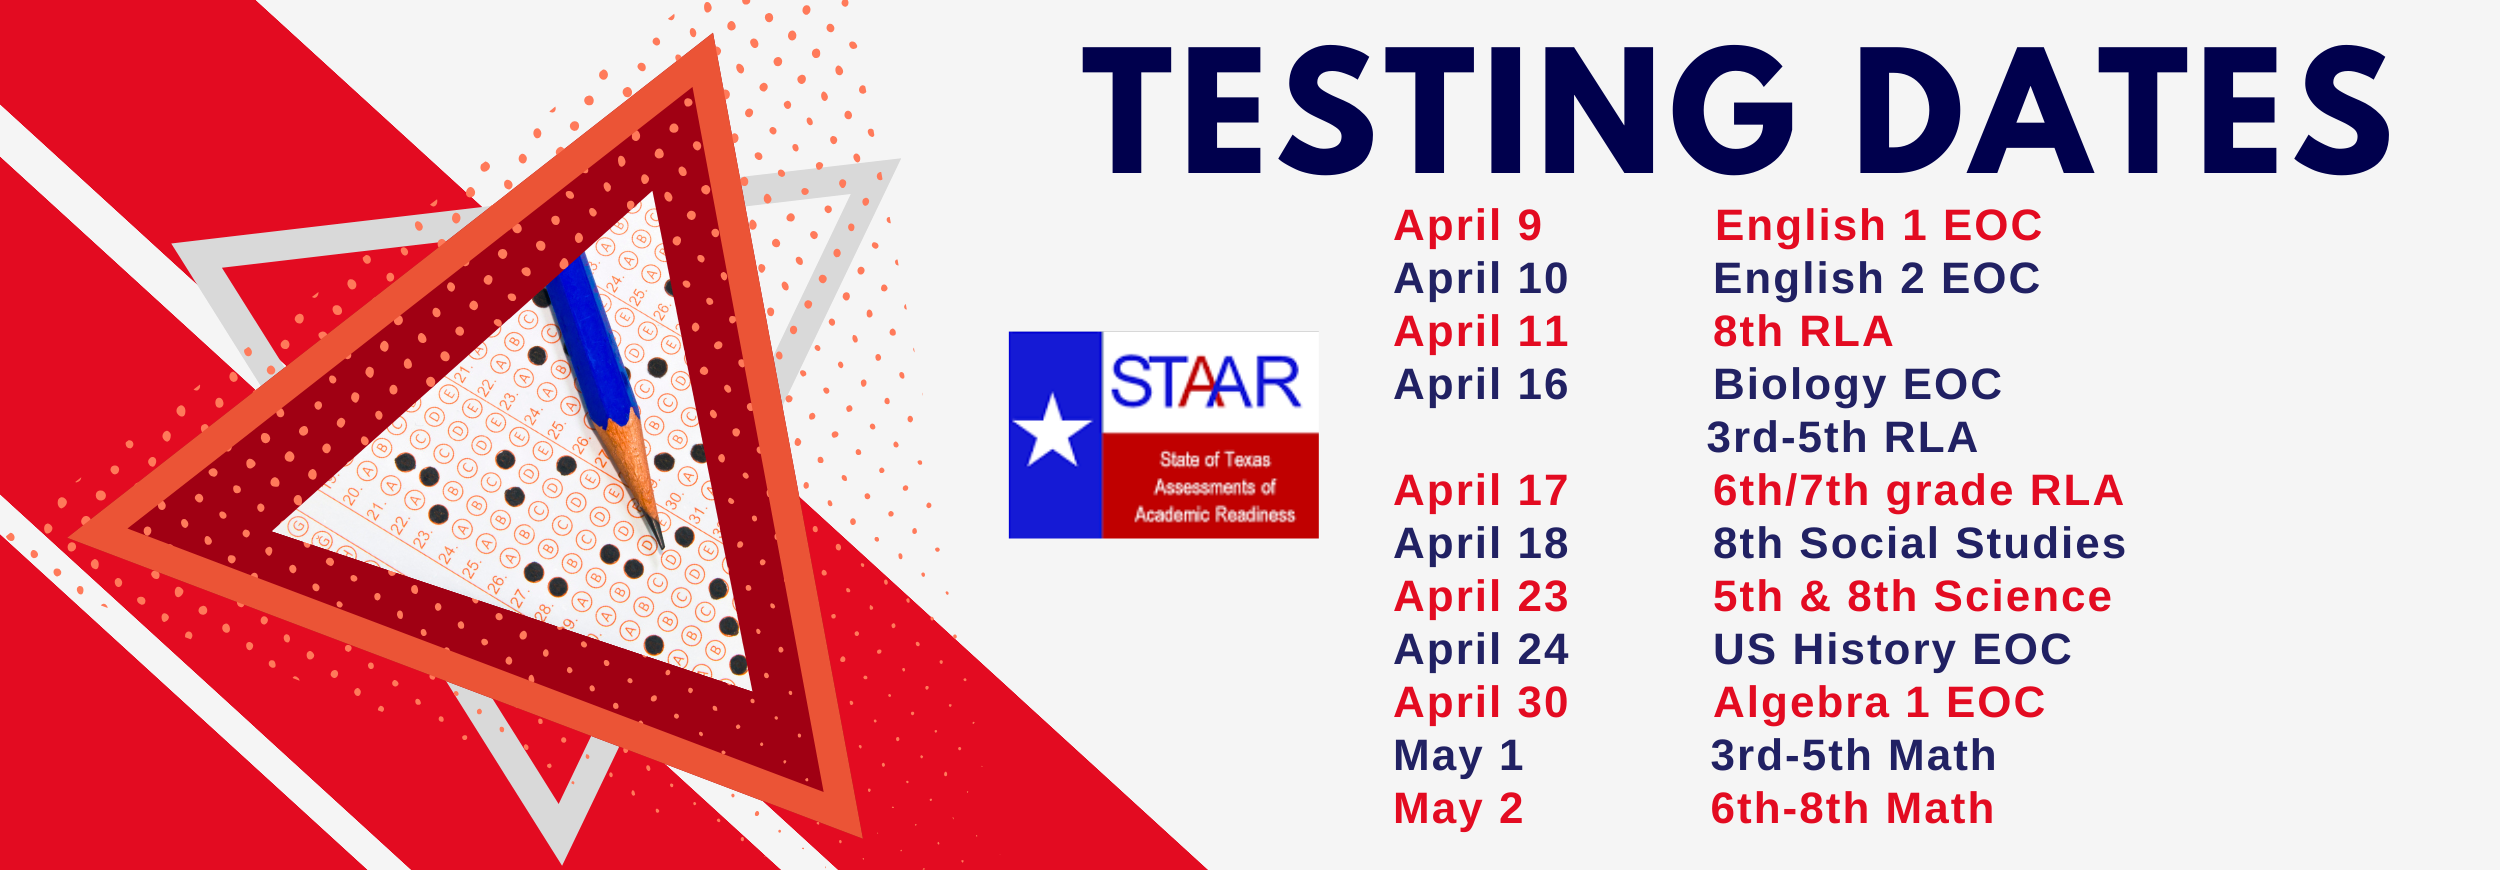 STAAR Testing Dates: April 9 - English 1 EOC  April 10 - English 2 EOC  April 11 - 8th RLA  April 16 - Biology EOC                         3rd-5th RLA  April 17 - 6th/7th grade RLA  April 18 - 8th Social Studies  April 23 - 5th & 8th Science  April 24 - US History EOC  April 30 - Algebra 1 EOC  May 1 - 3rd-5th Math  May 2 - 6th-8th Math